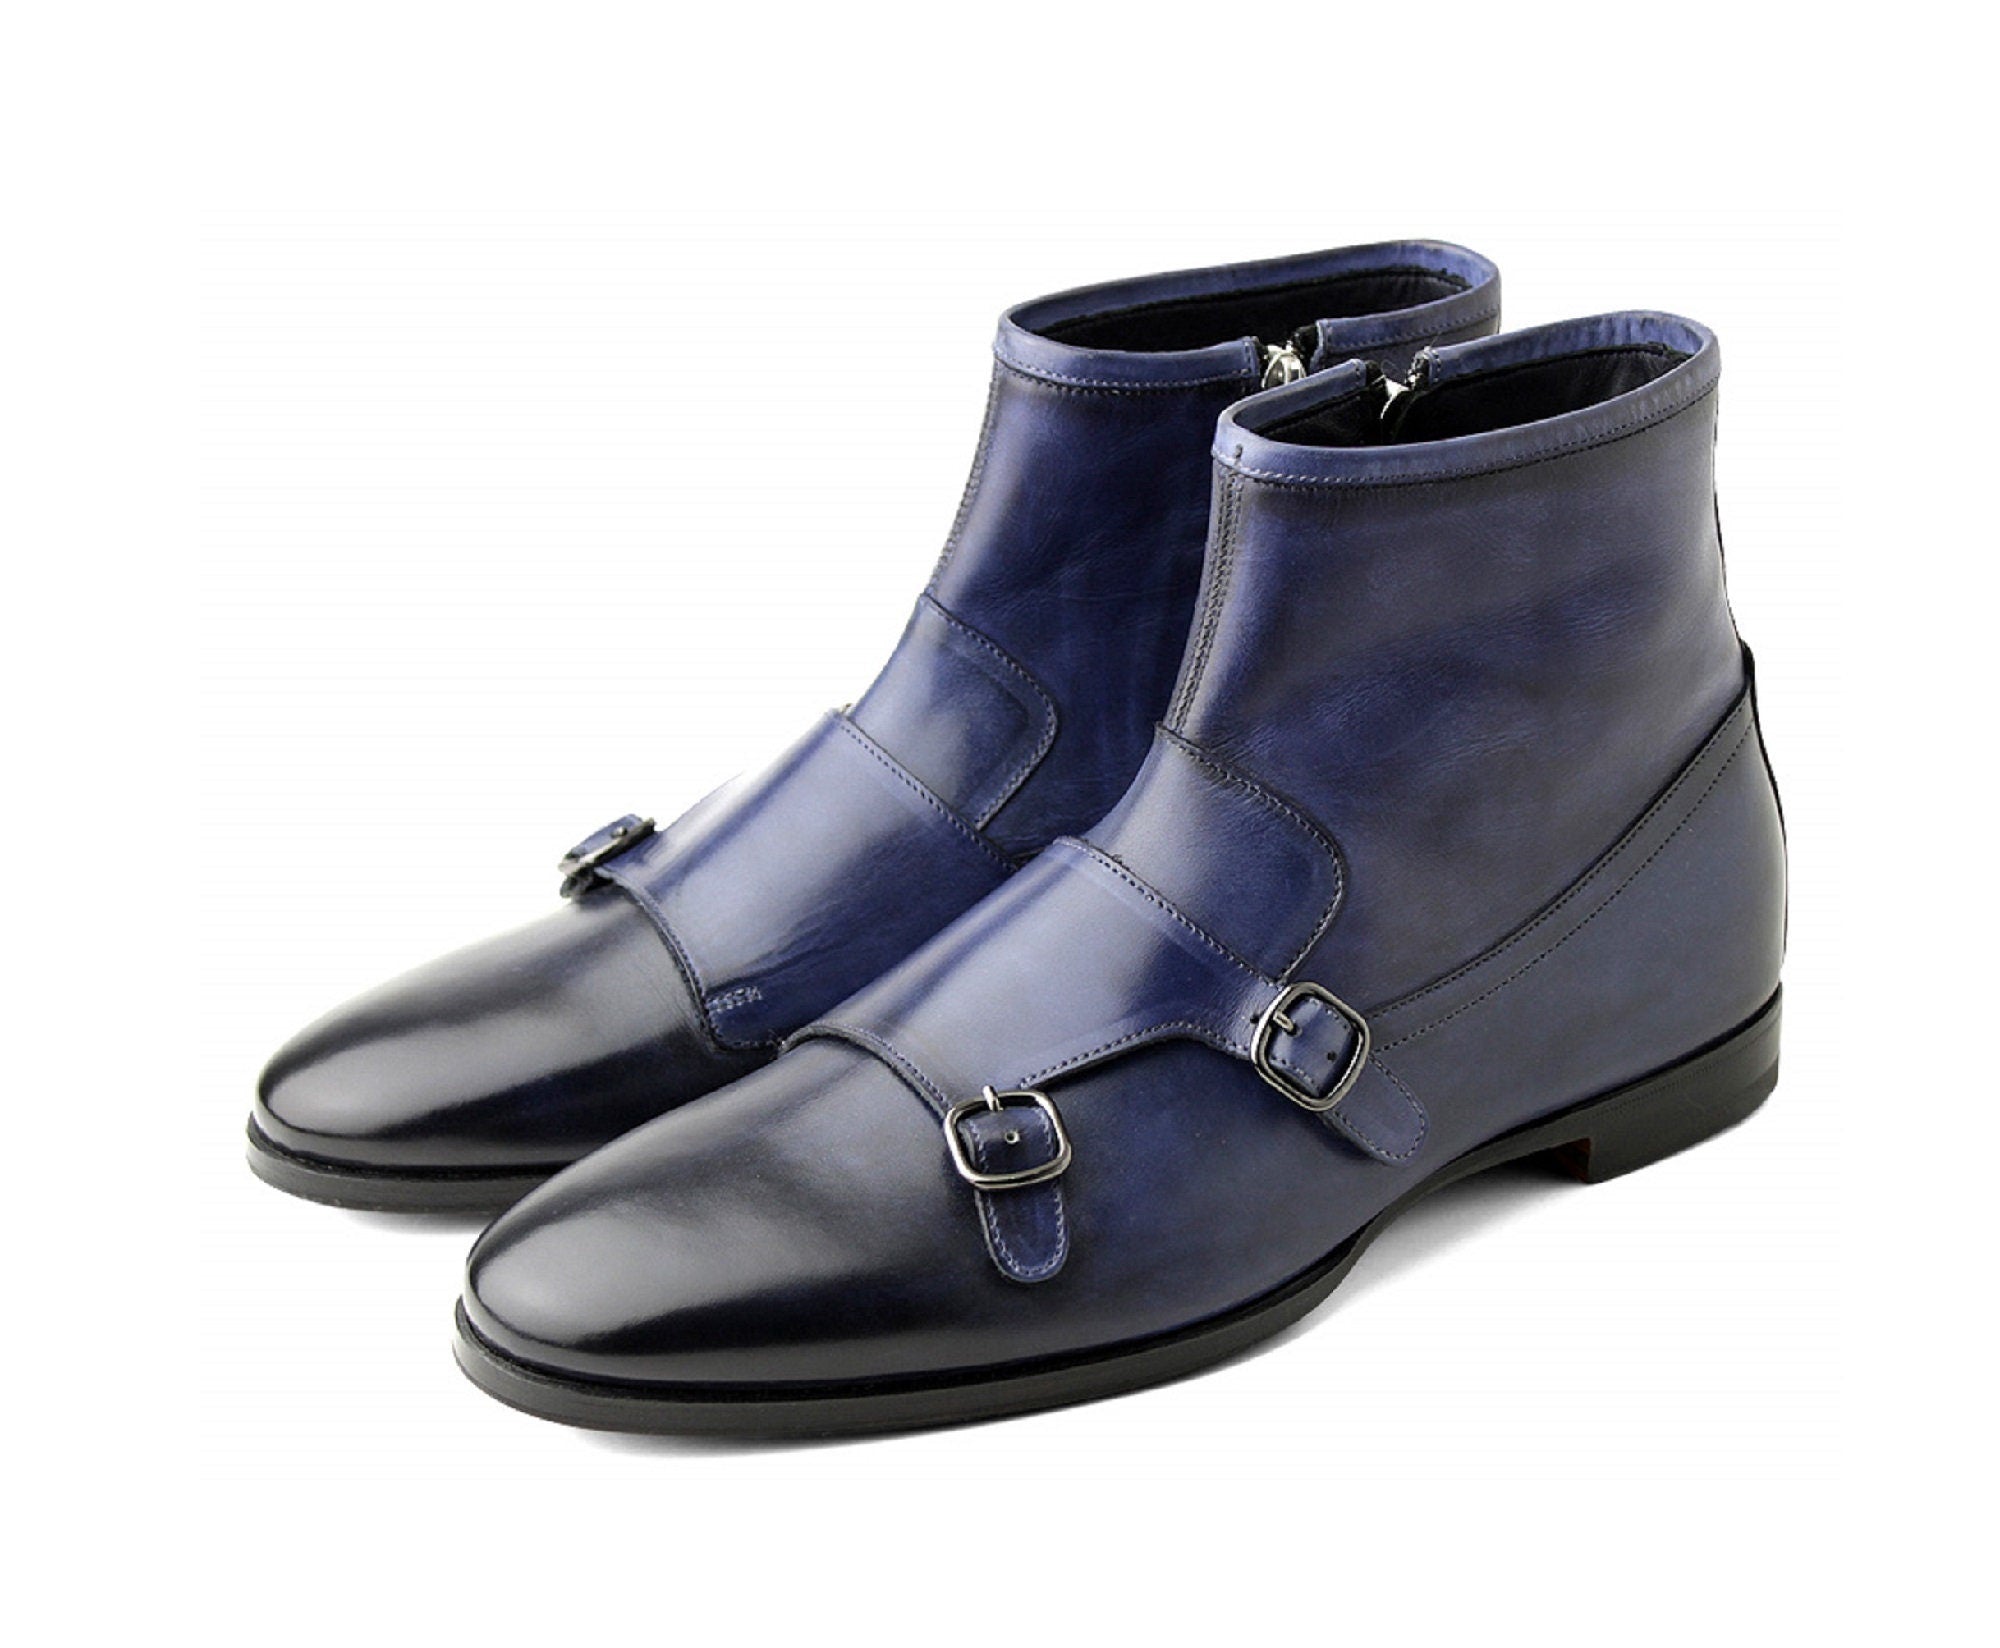 Handmade Men's Blue Color Monk Straps With Side Zipper Leather Boot For Men's